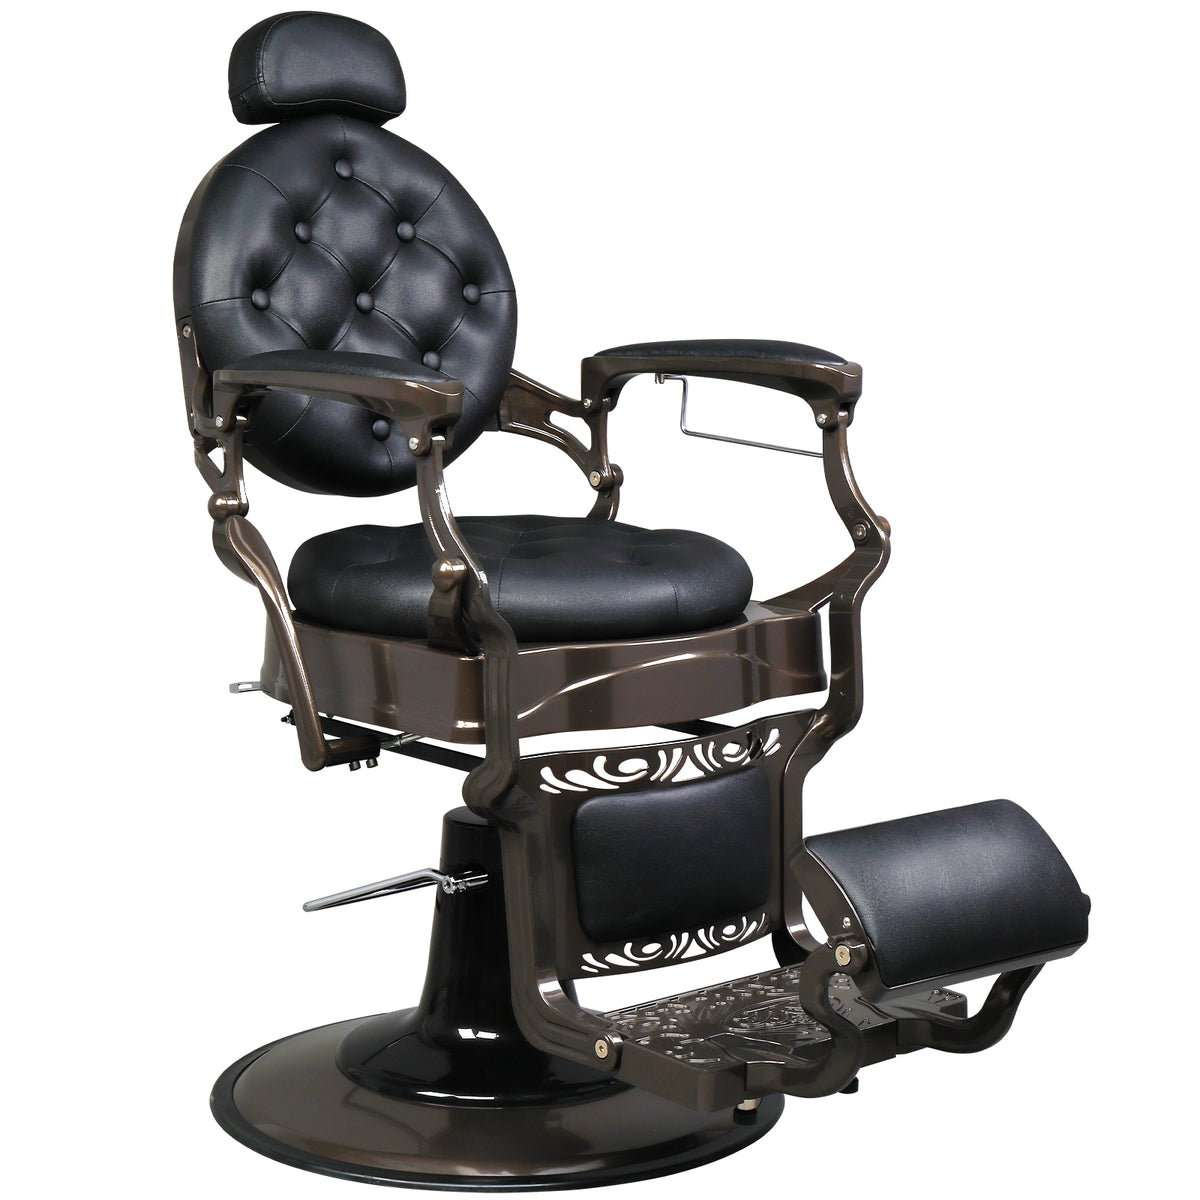 OmySalon BC1101 Vintage Style Heavy Duty Hydraulic Recline Barber Chair Black/Bronze/Golden/Red/Silver